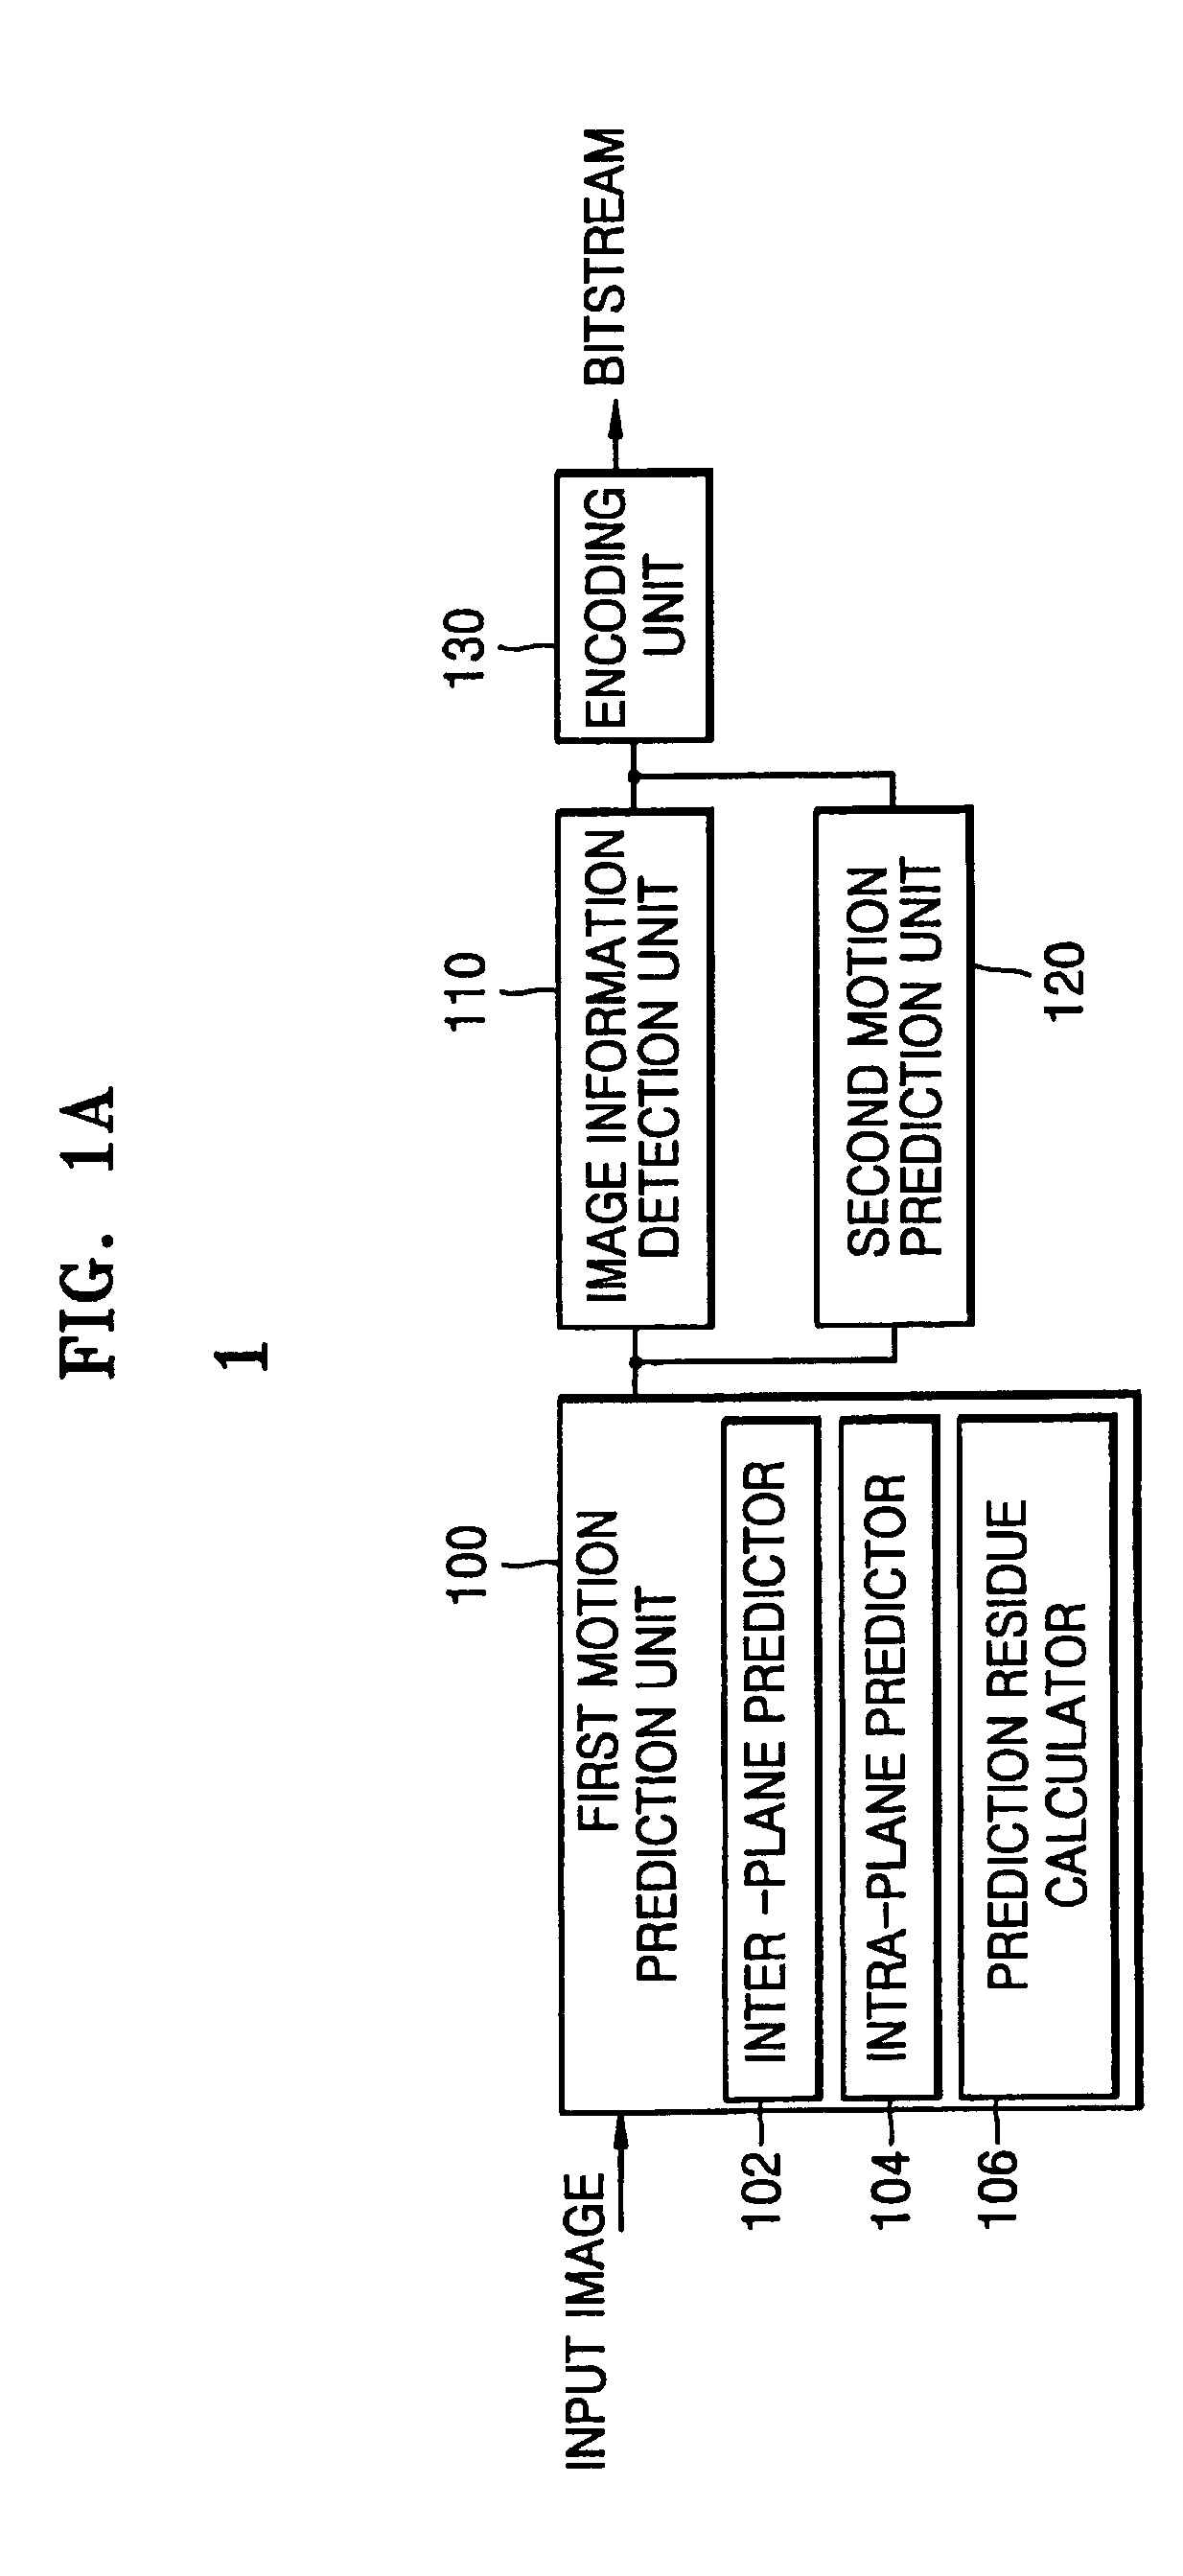 Video encoding/decoding apparatus and method for color image